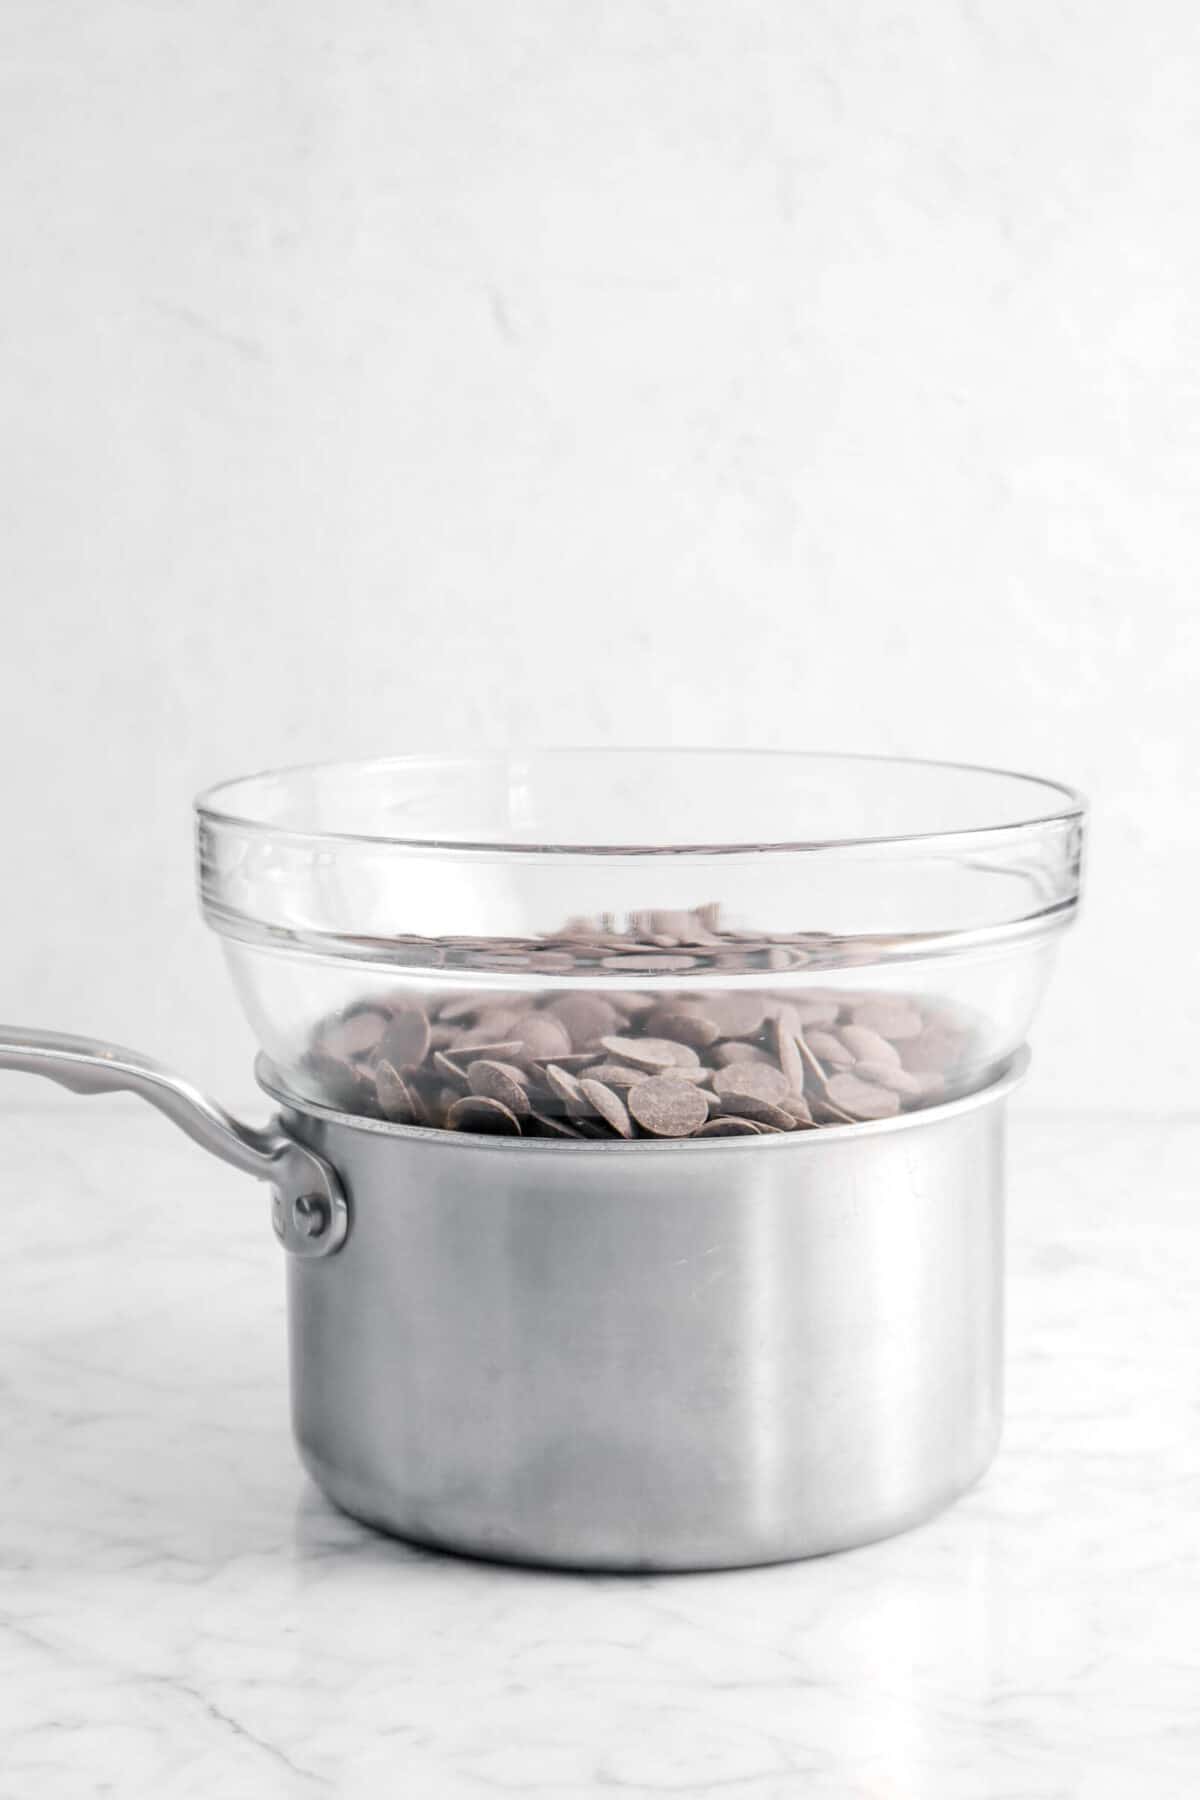 chocolate in a glass bowl on a small pot